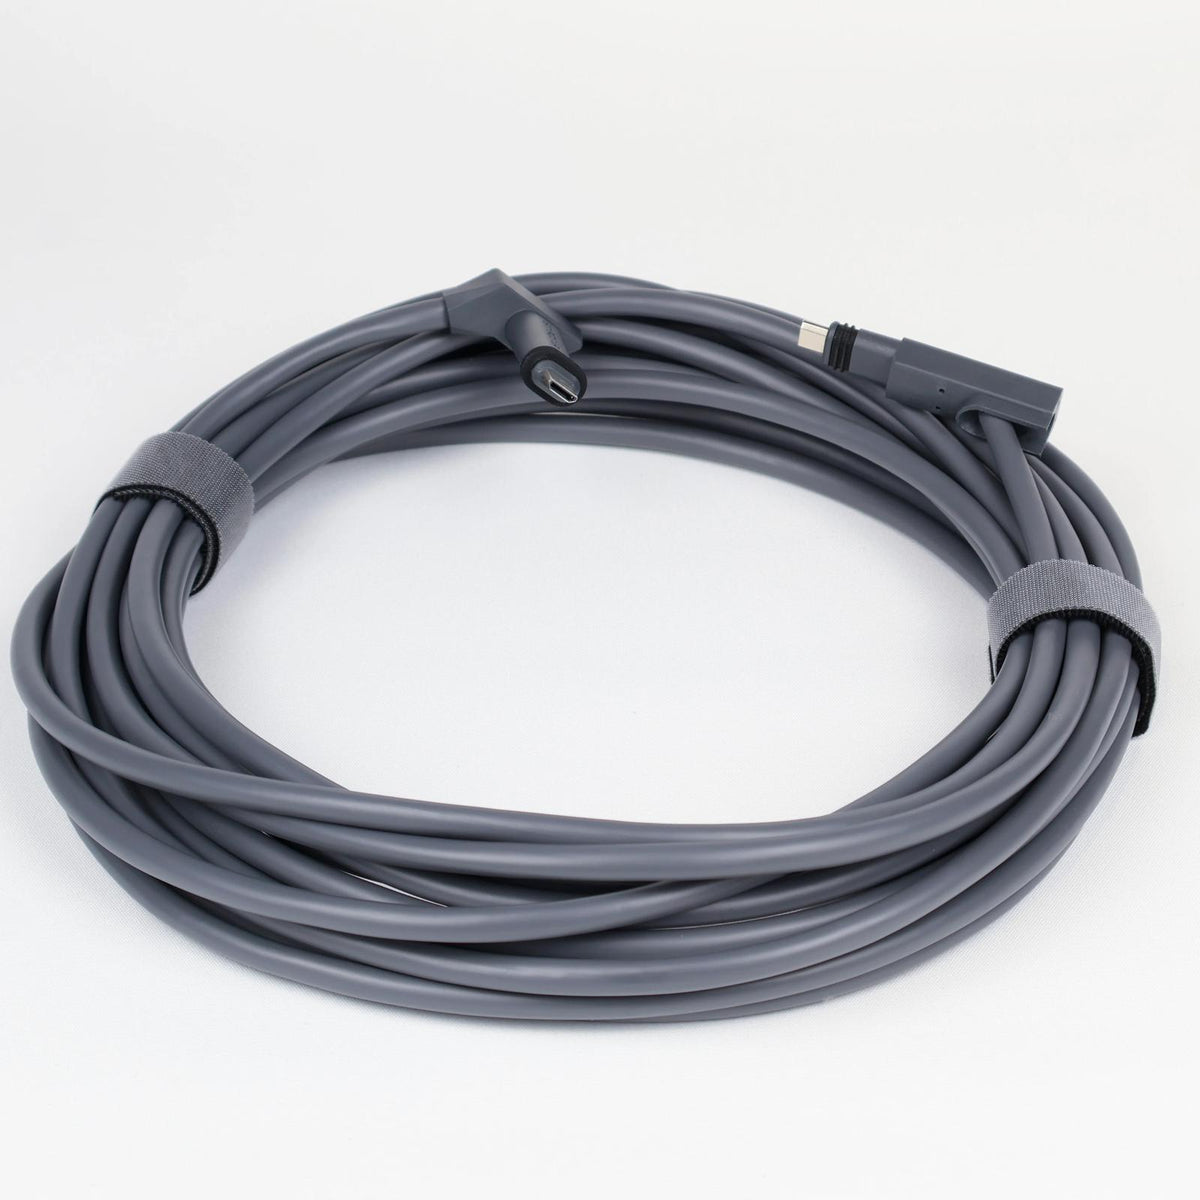 Starlink SPX Cable - 10m (32ft) - EVAAM